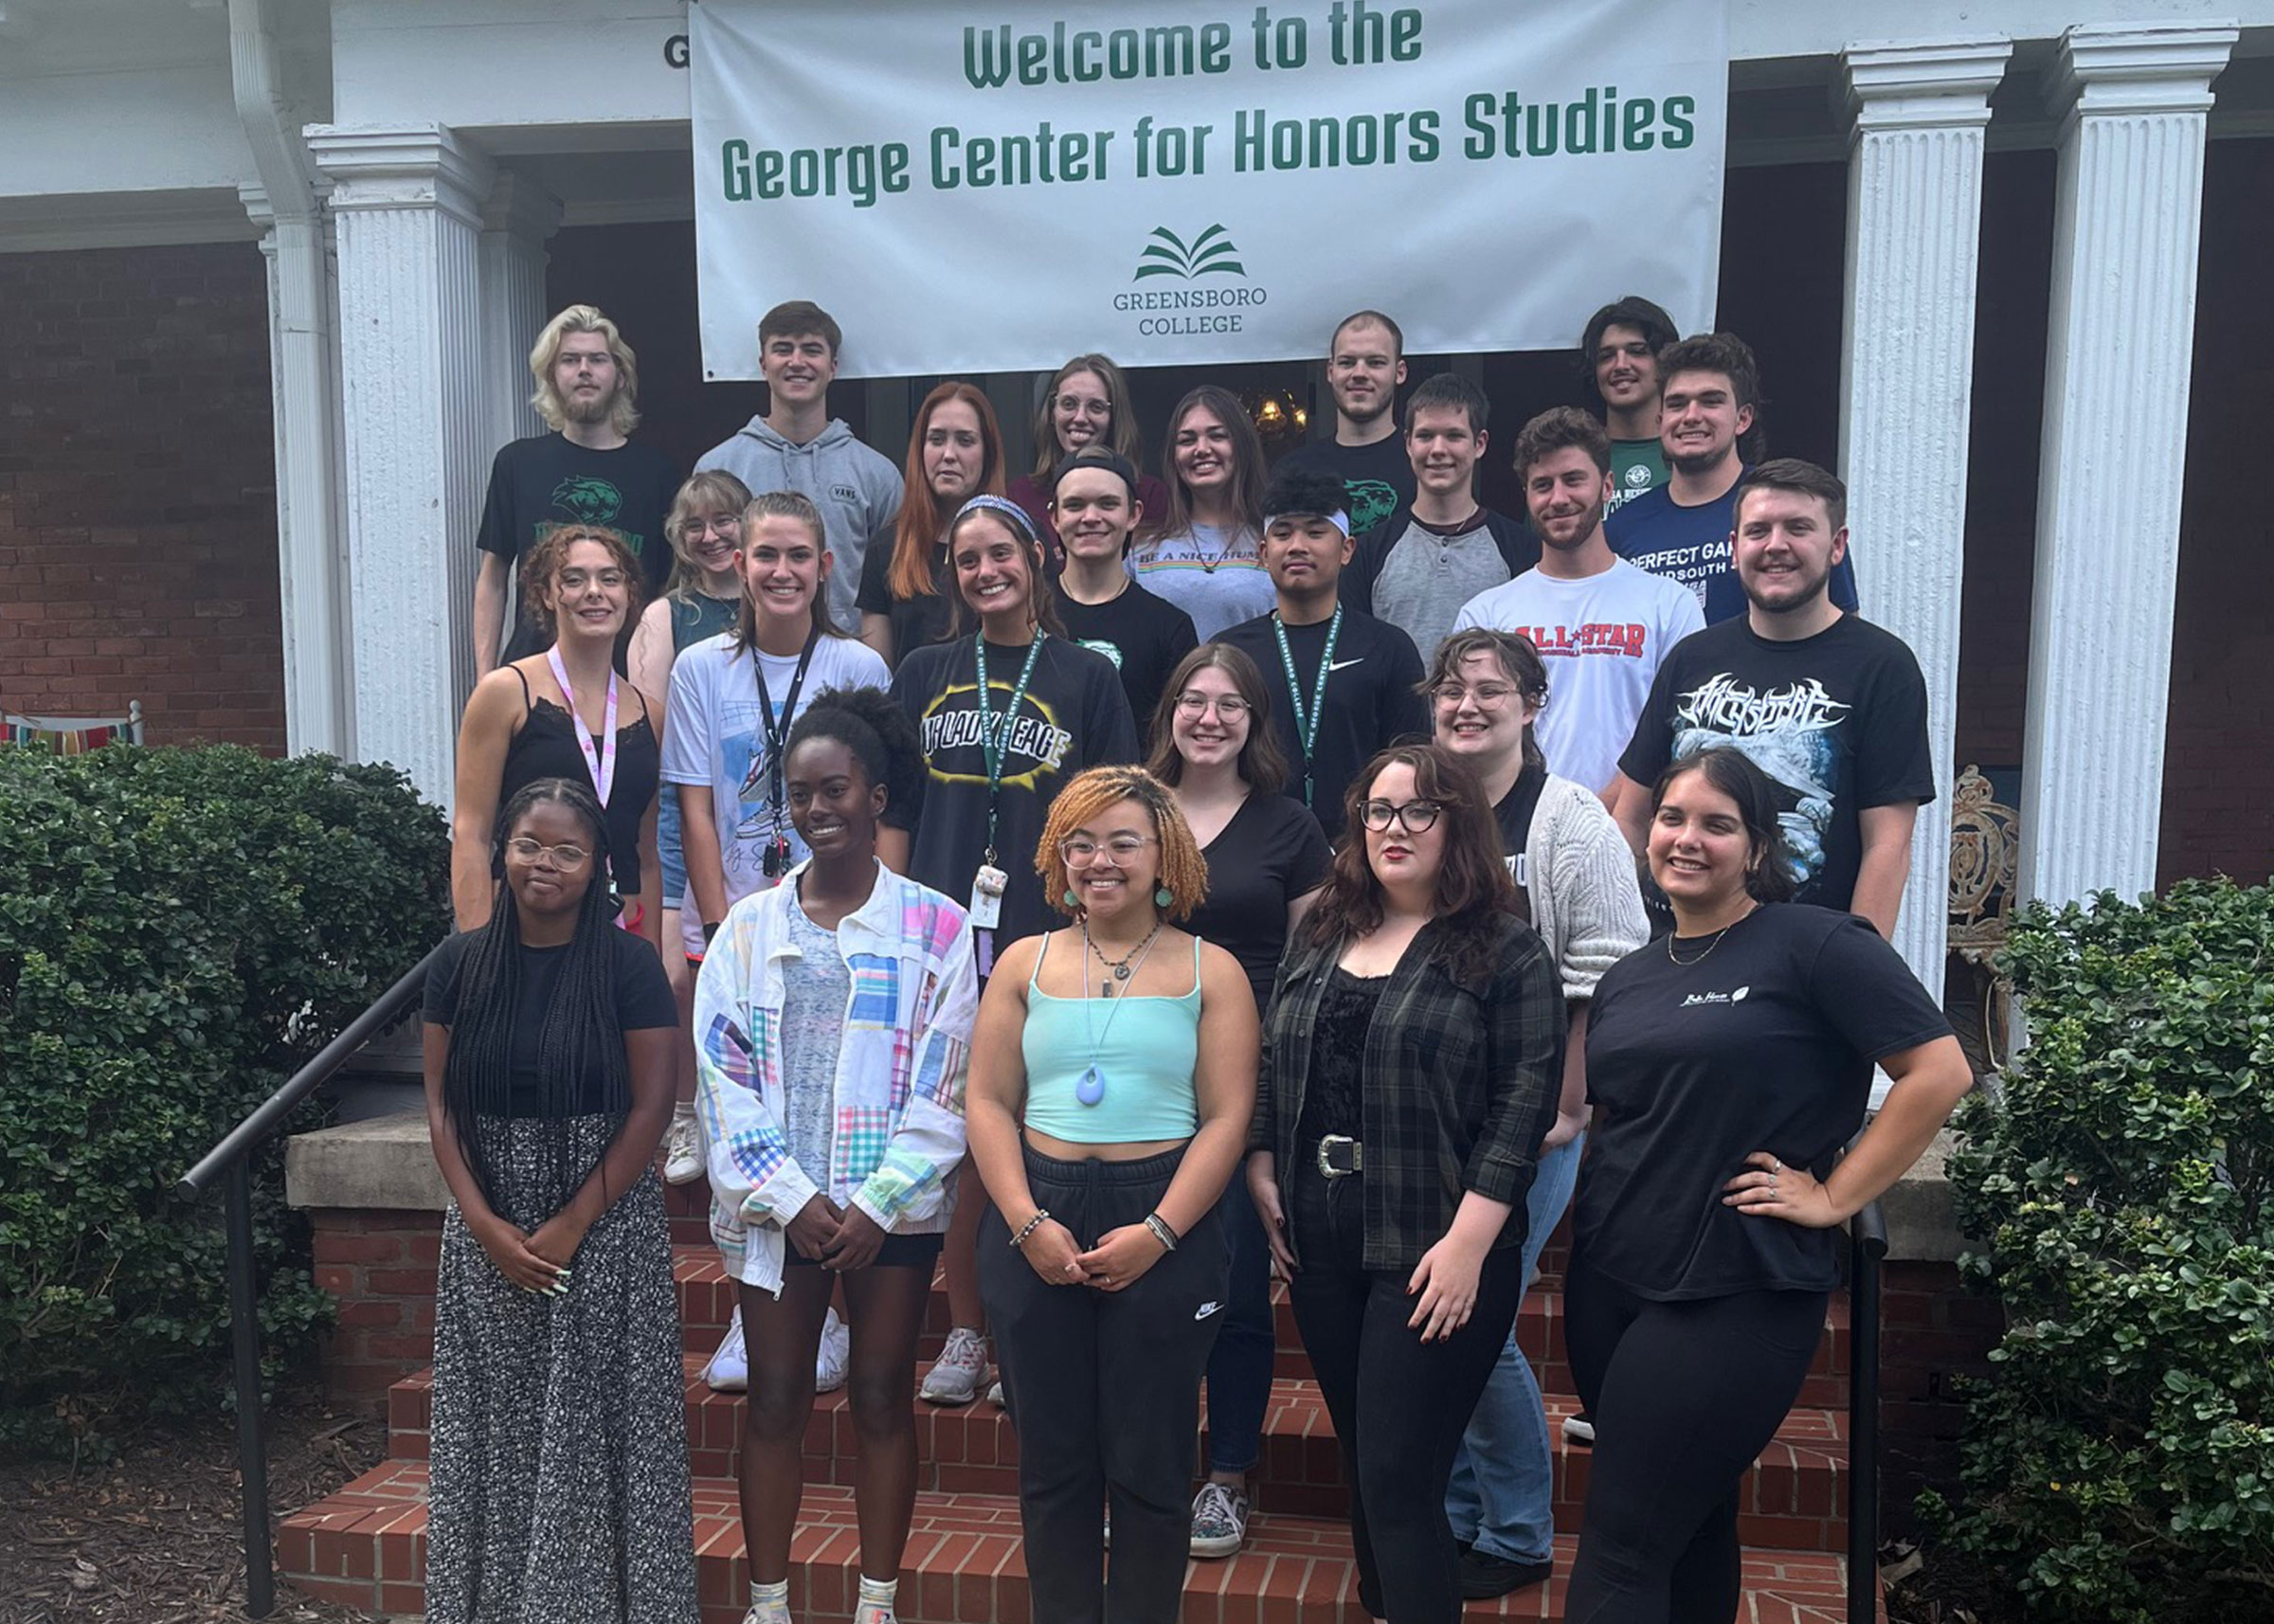 Greensboro College George Center For Honors Studies image